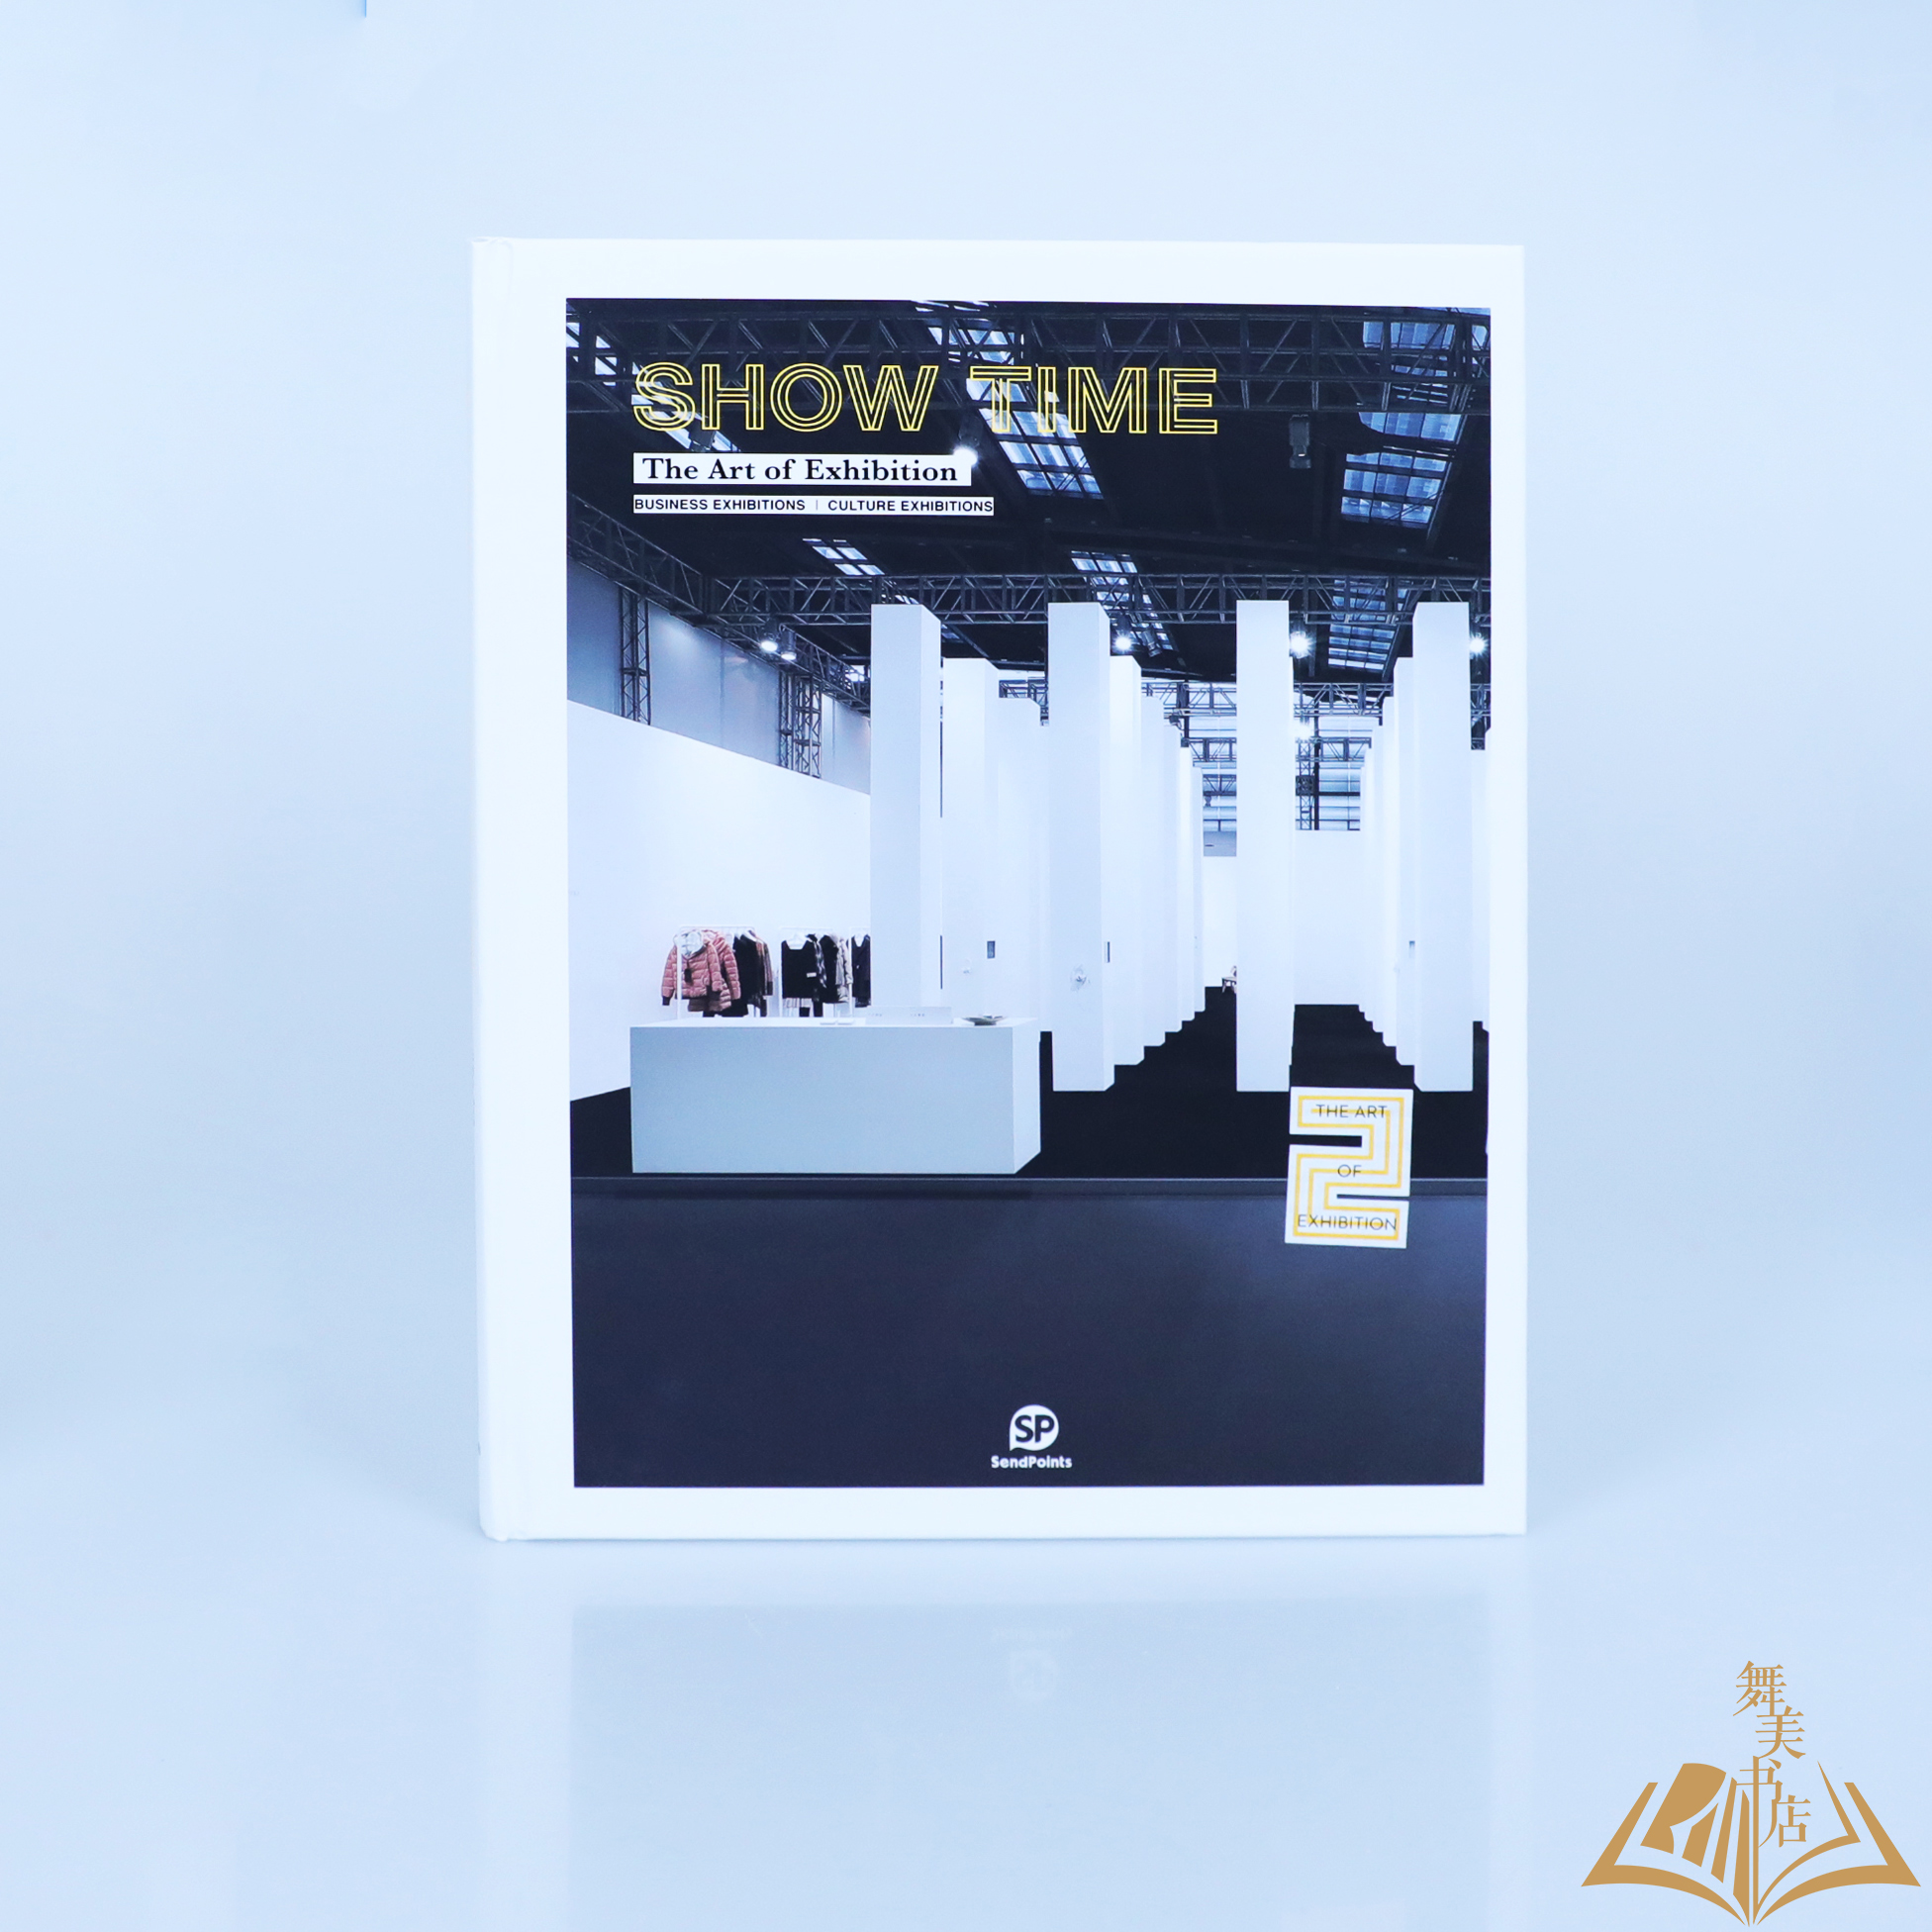 《SHOW TIME 2 - The Art of Exhibition》（现场力量2 - 展示的艺术）